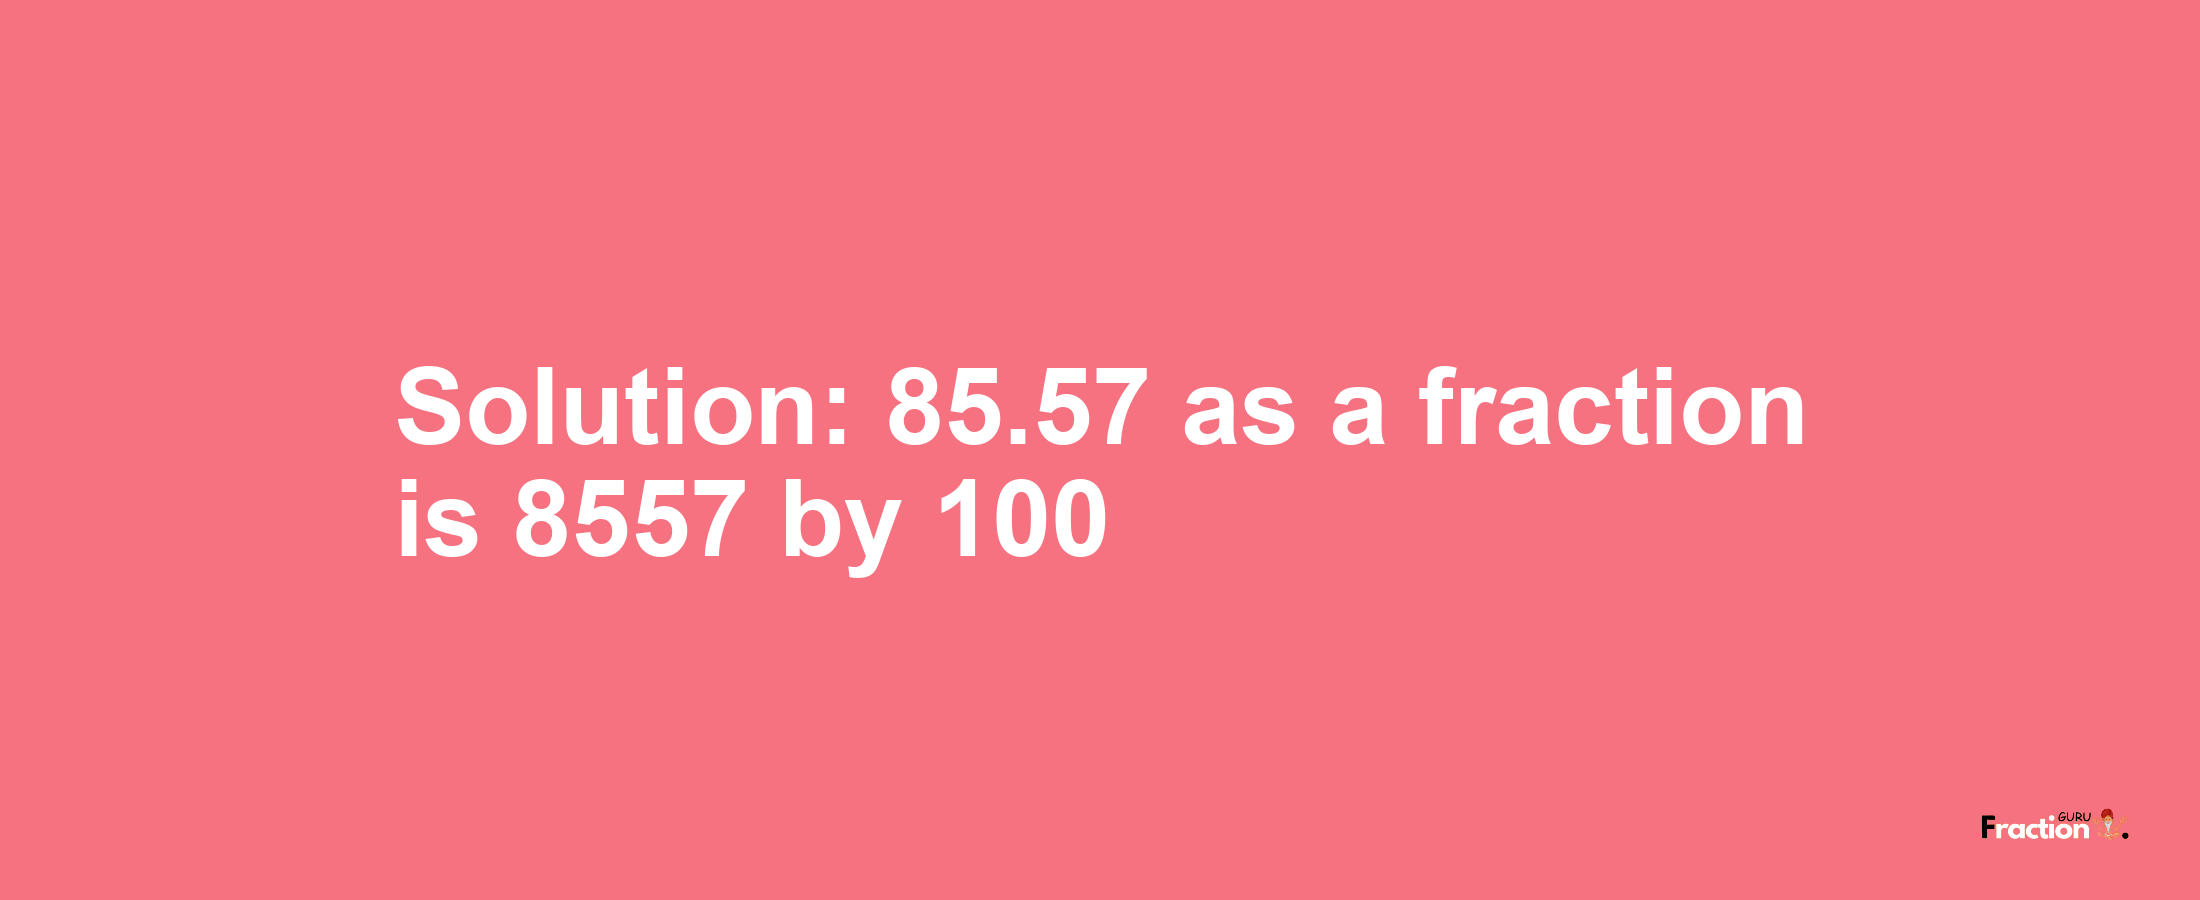 Solution:85.57 as a fraction is 8557/100